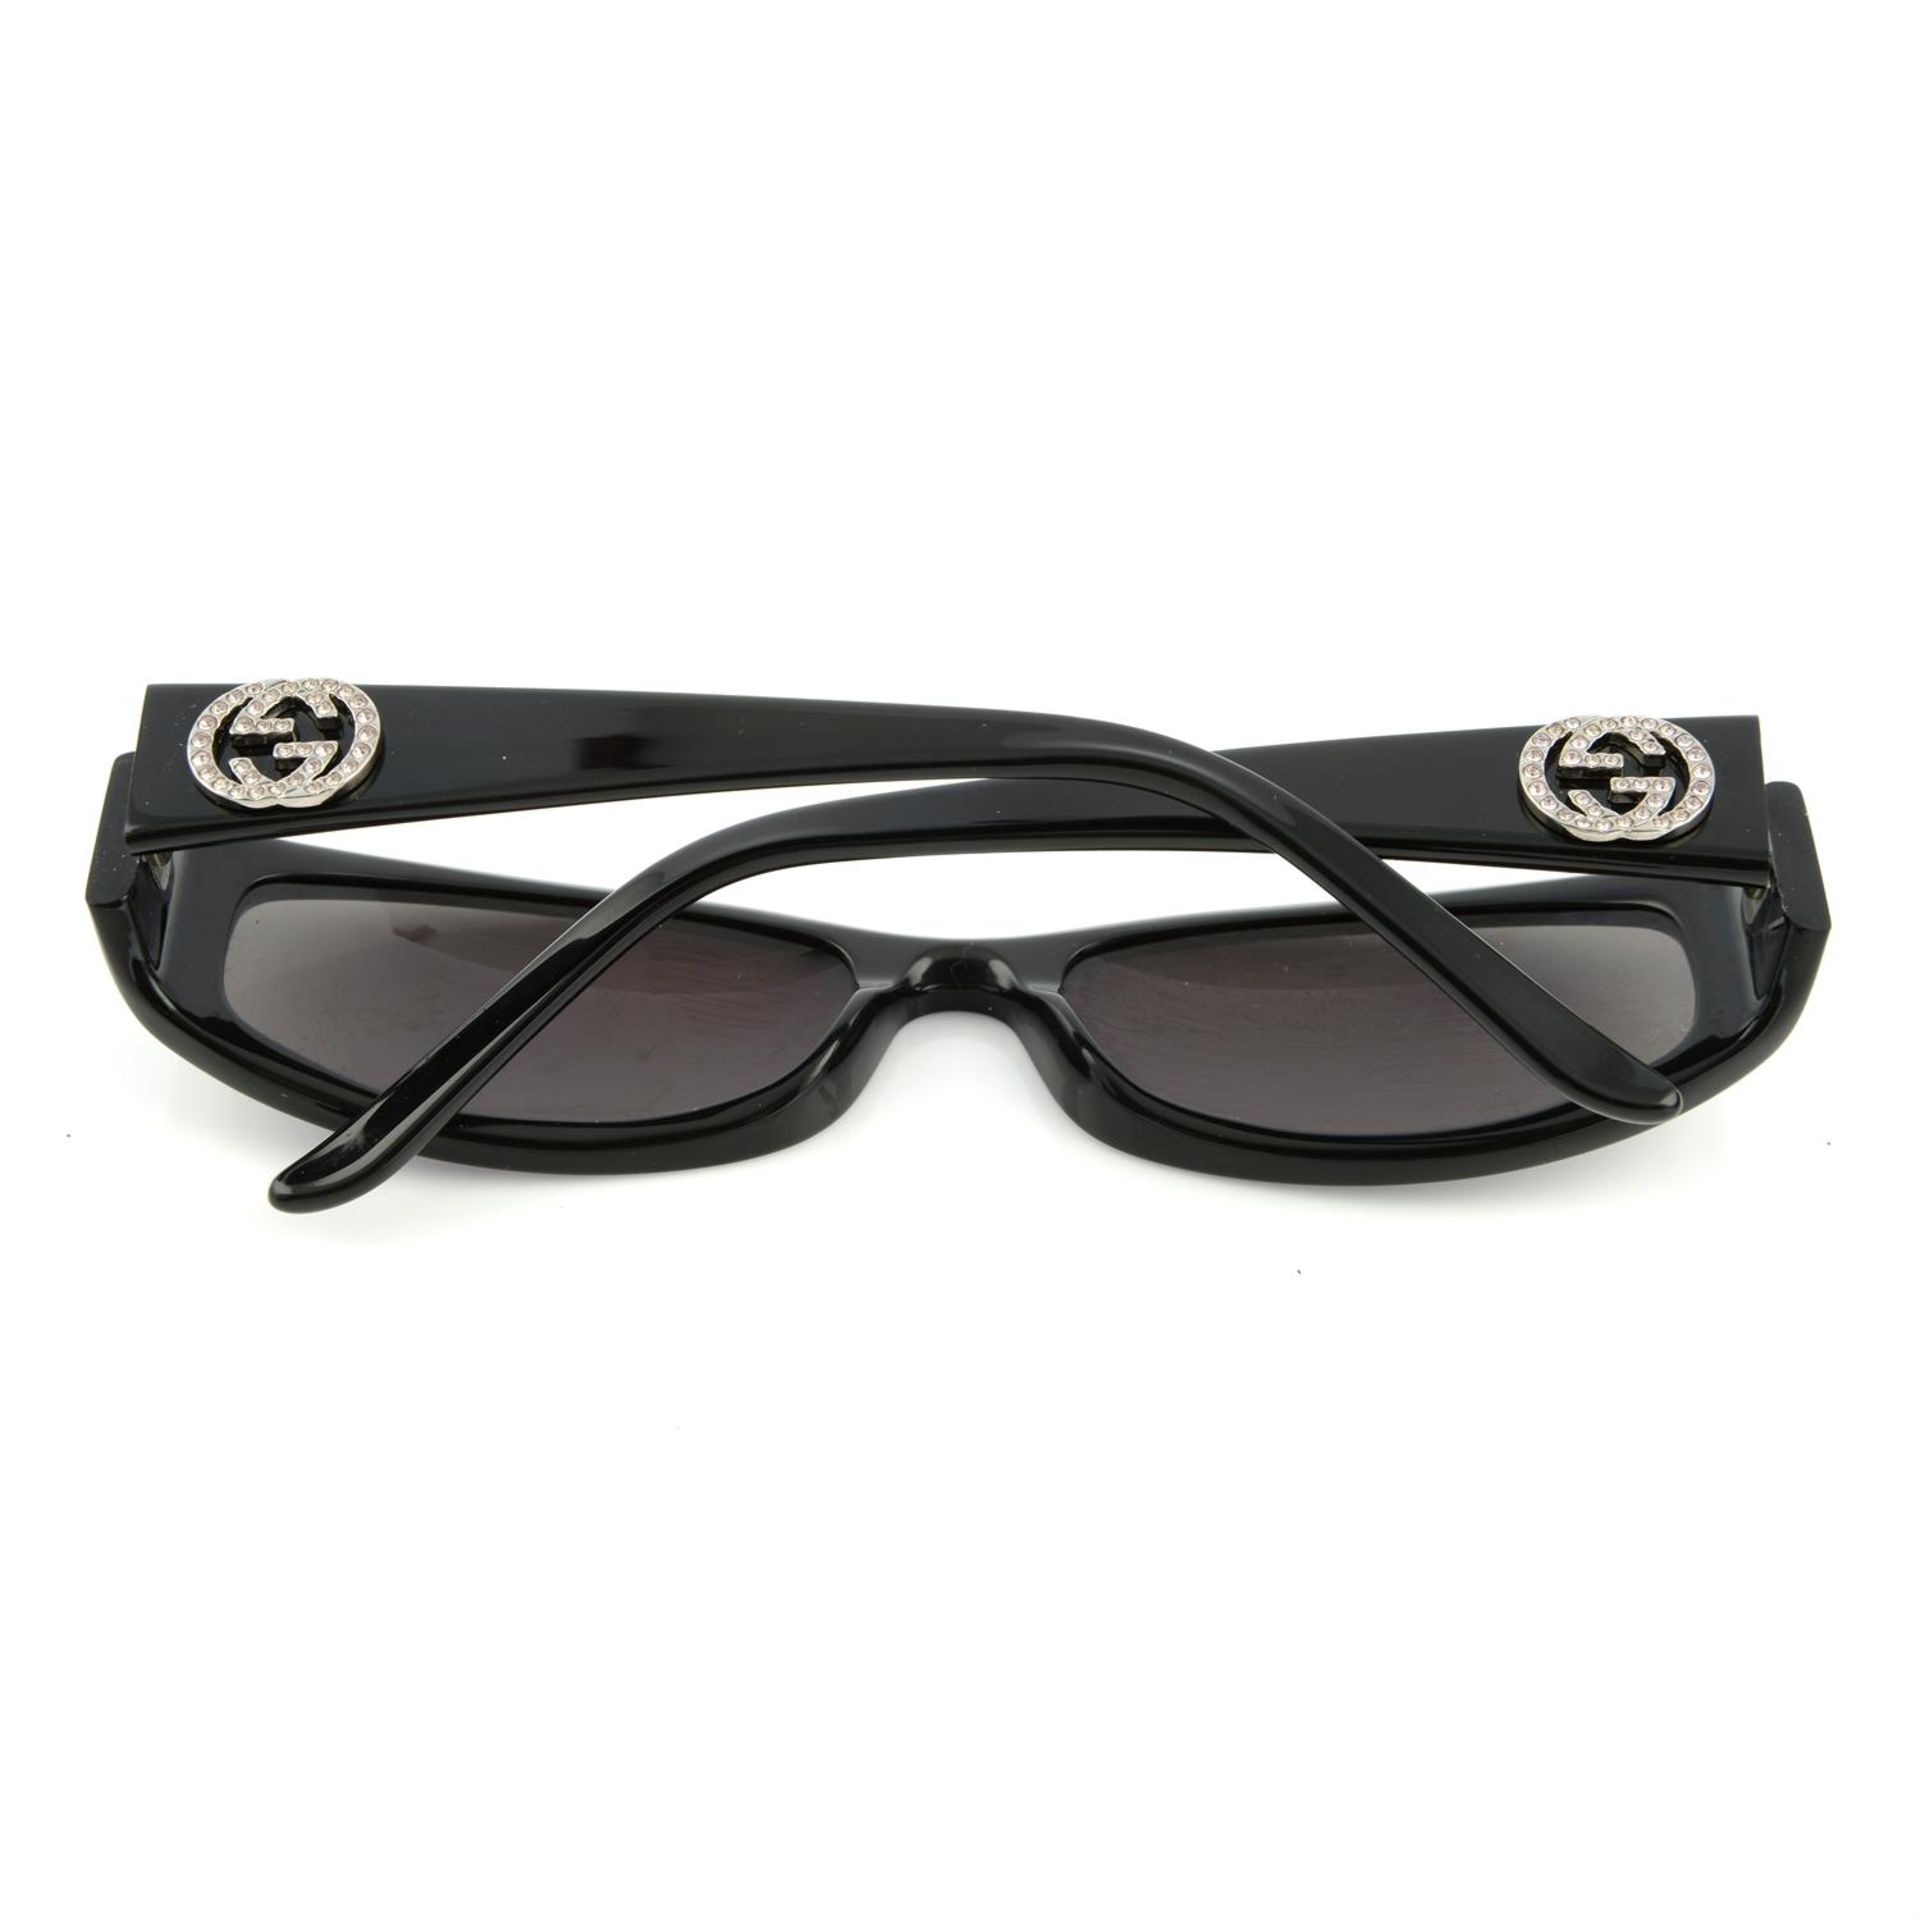 GUCCI - a pair of sunglasses. - Image 2 of 3